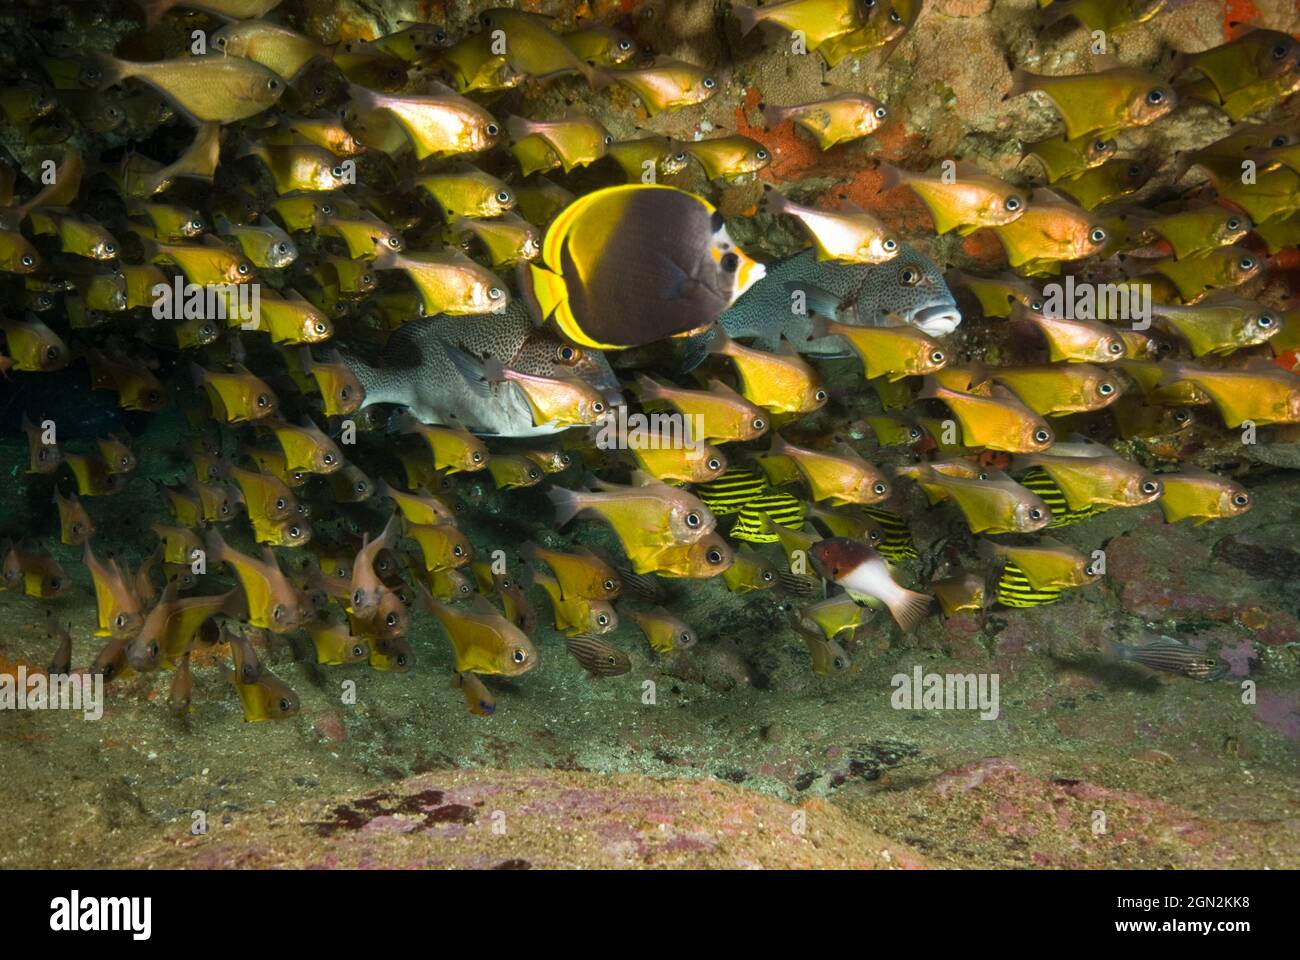 Tropical and temperate fishes mix in this area. Tropical: Dusky butterflyfish (Chaetodon flavirostris) in foreground; Dotted sweetlips (Plectorhinchus Stock Photo